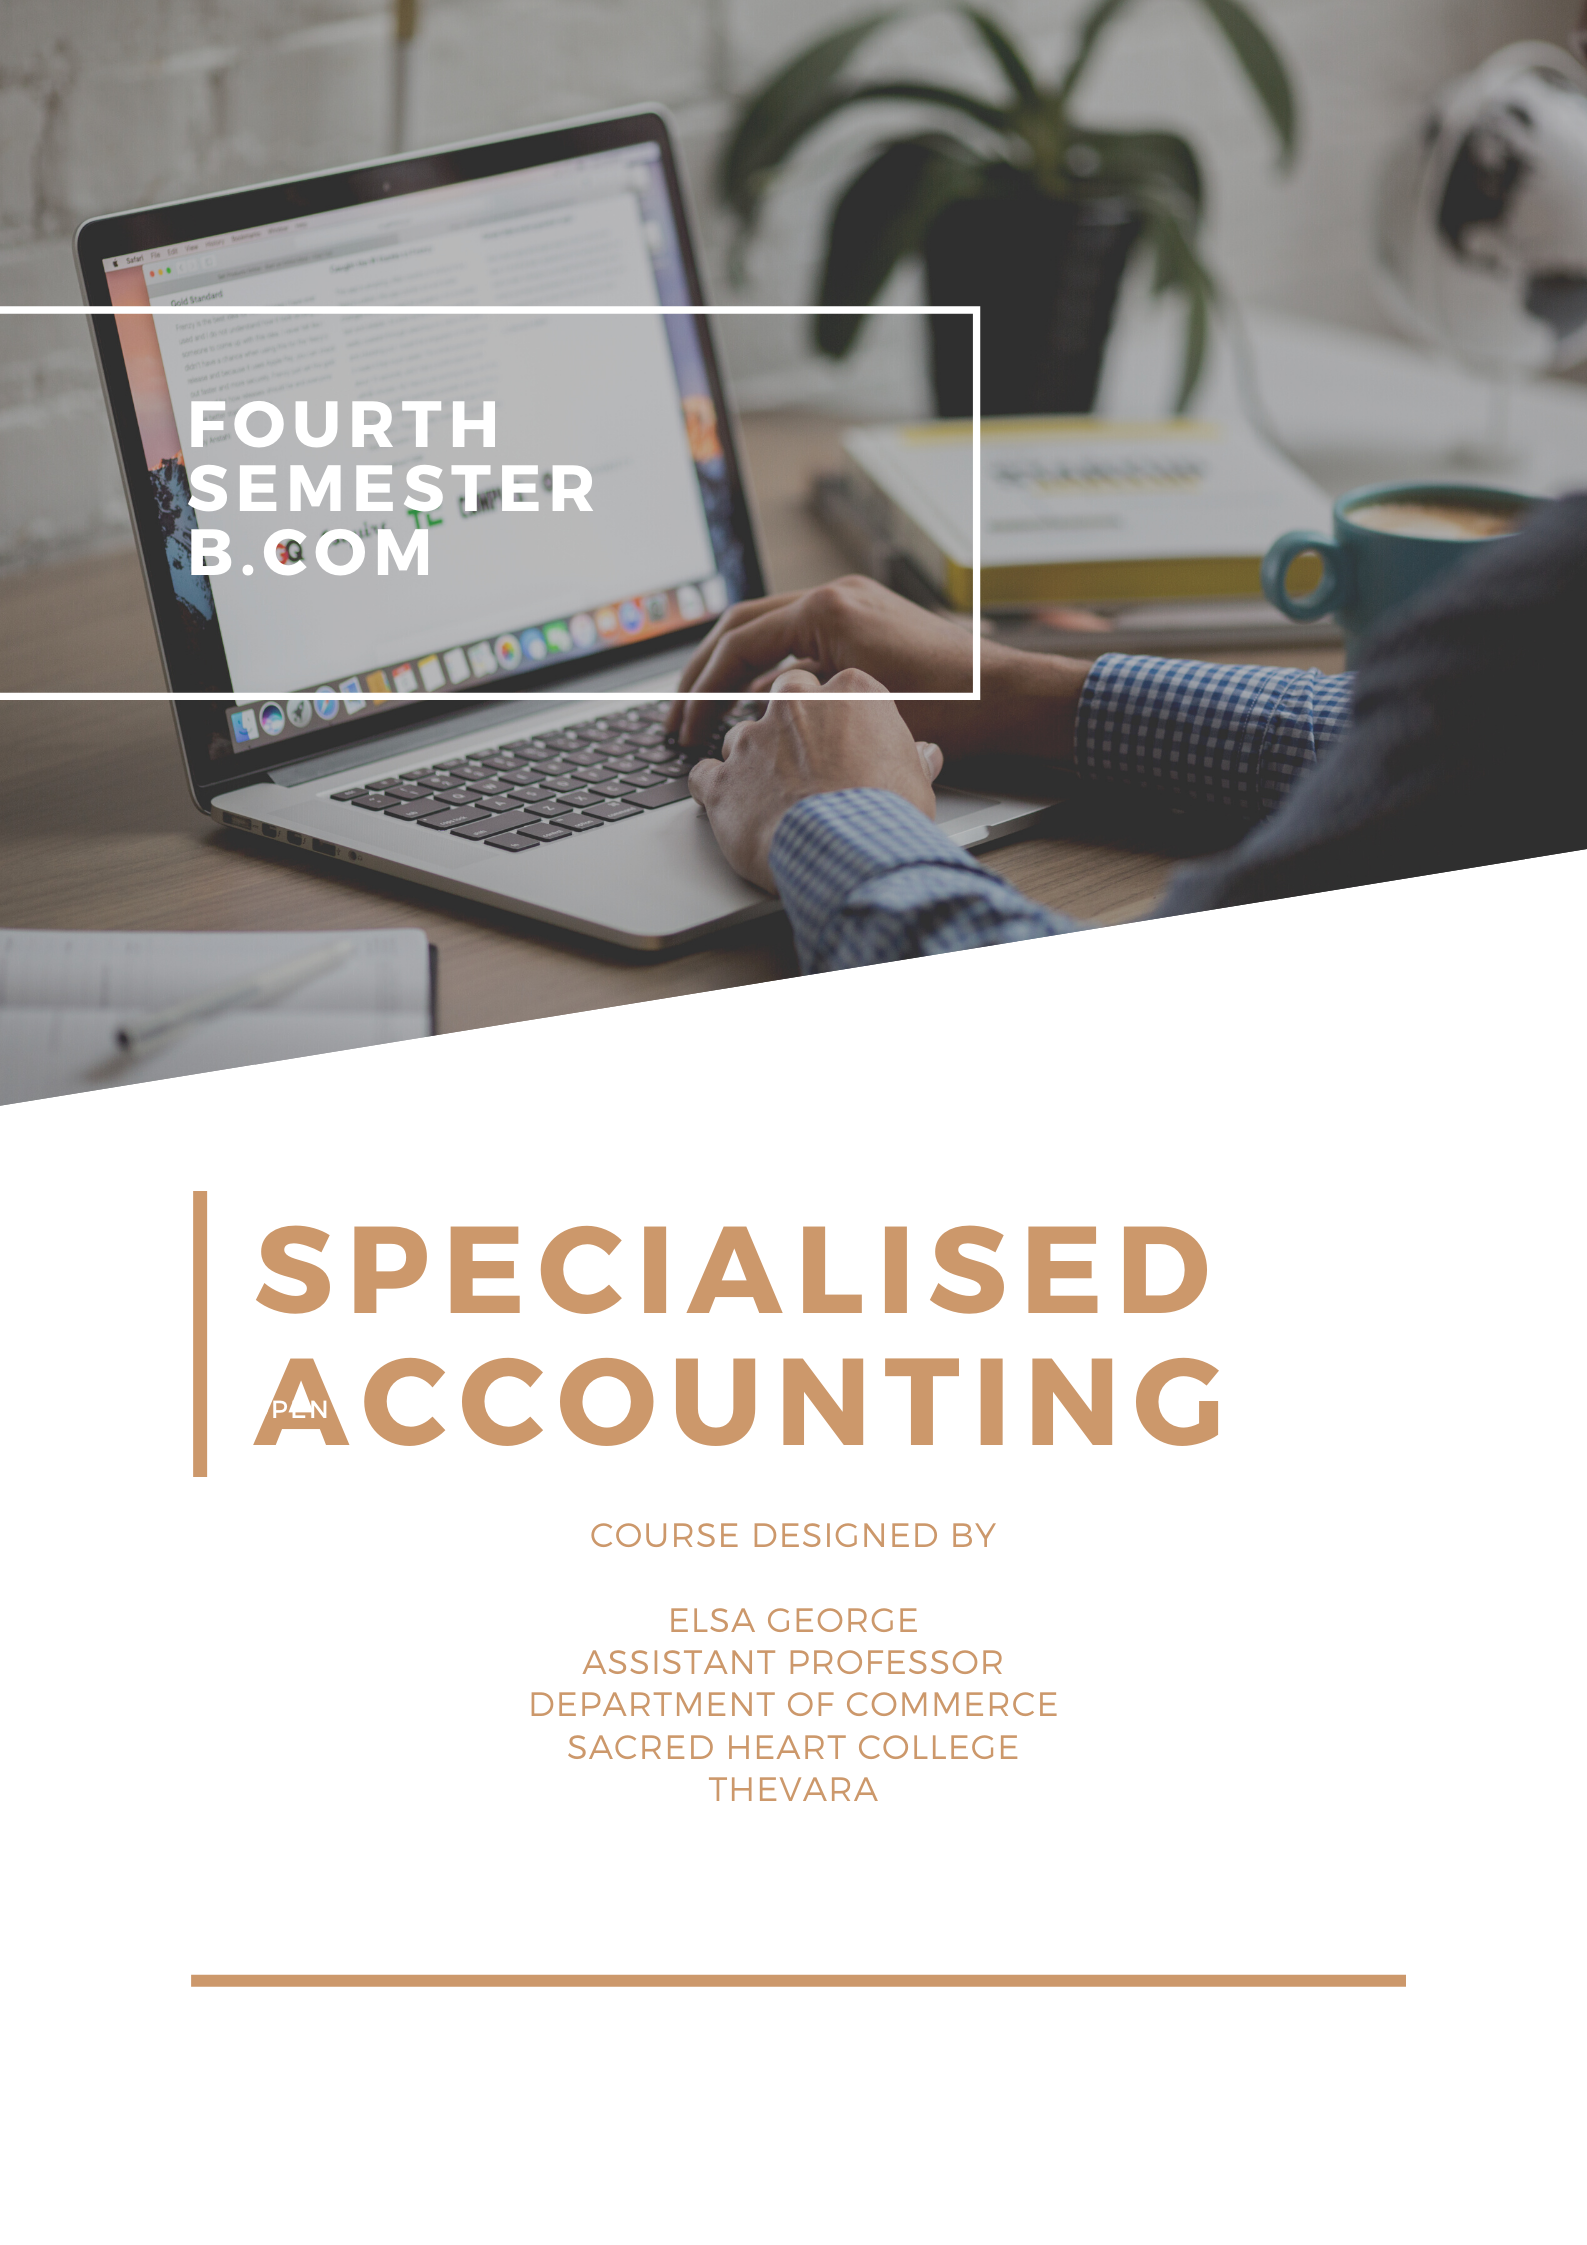 SPECIALISED ACCOUNTING